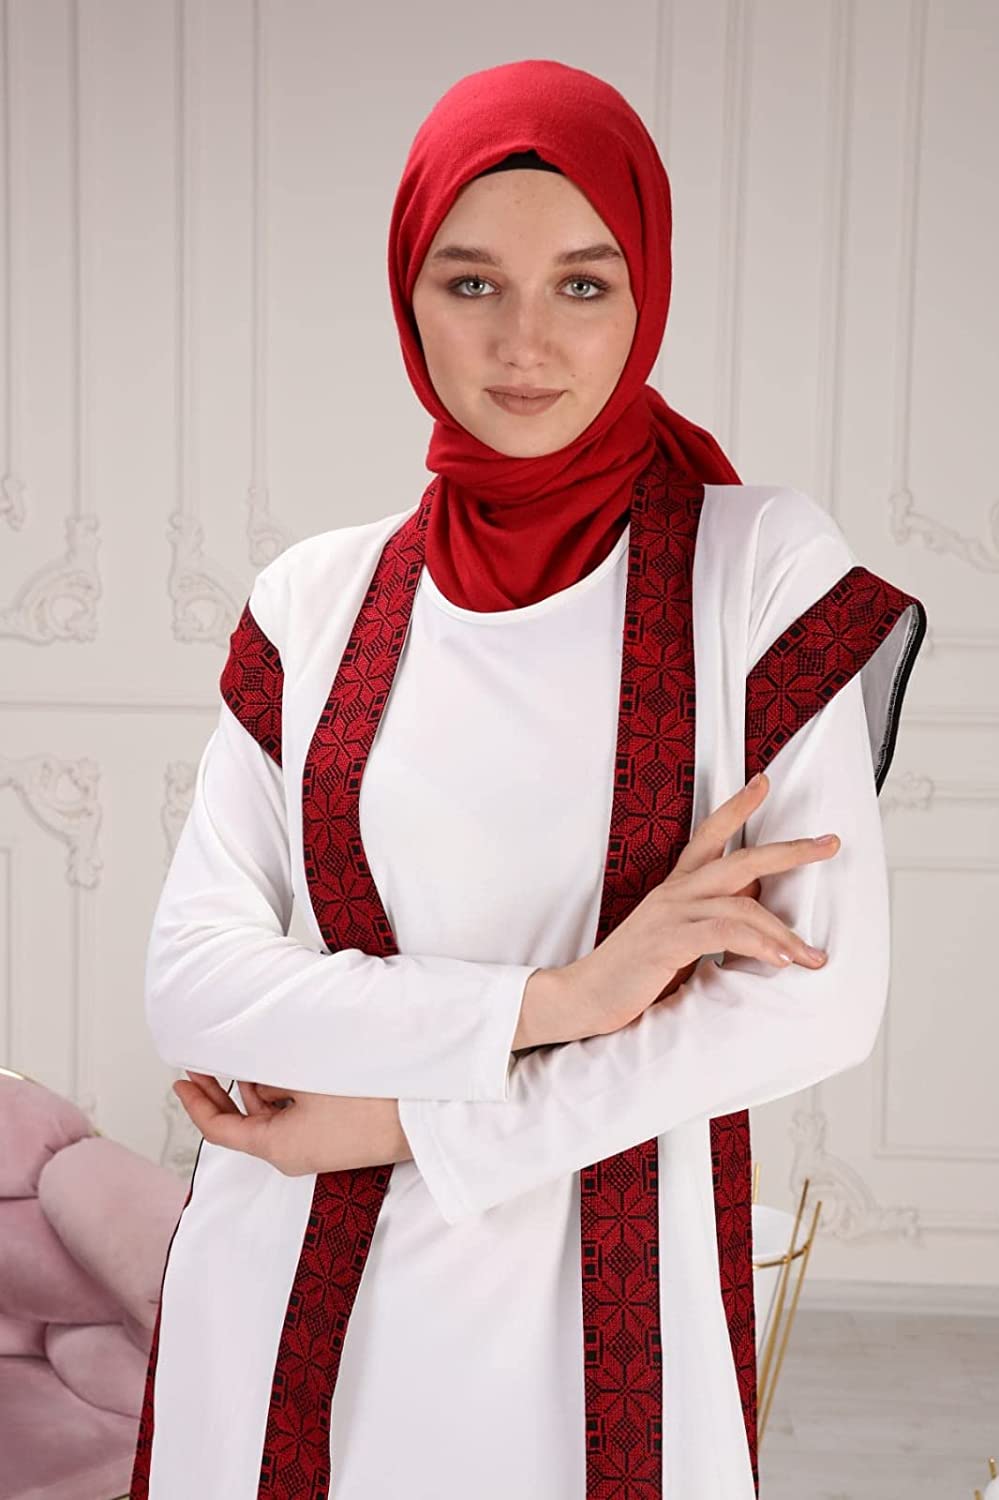 Marwa Fashion Palestinian Thobe Dress for Women - Traditional Palestinian Dress for Girl with Beautiful Embroidery - Dress for Wedding, Parties and Dinner White